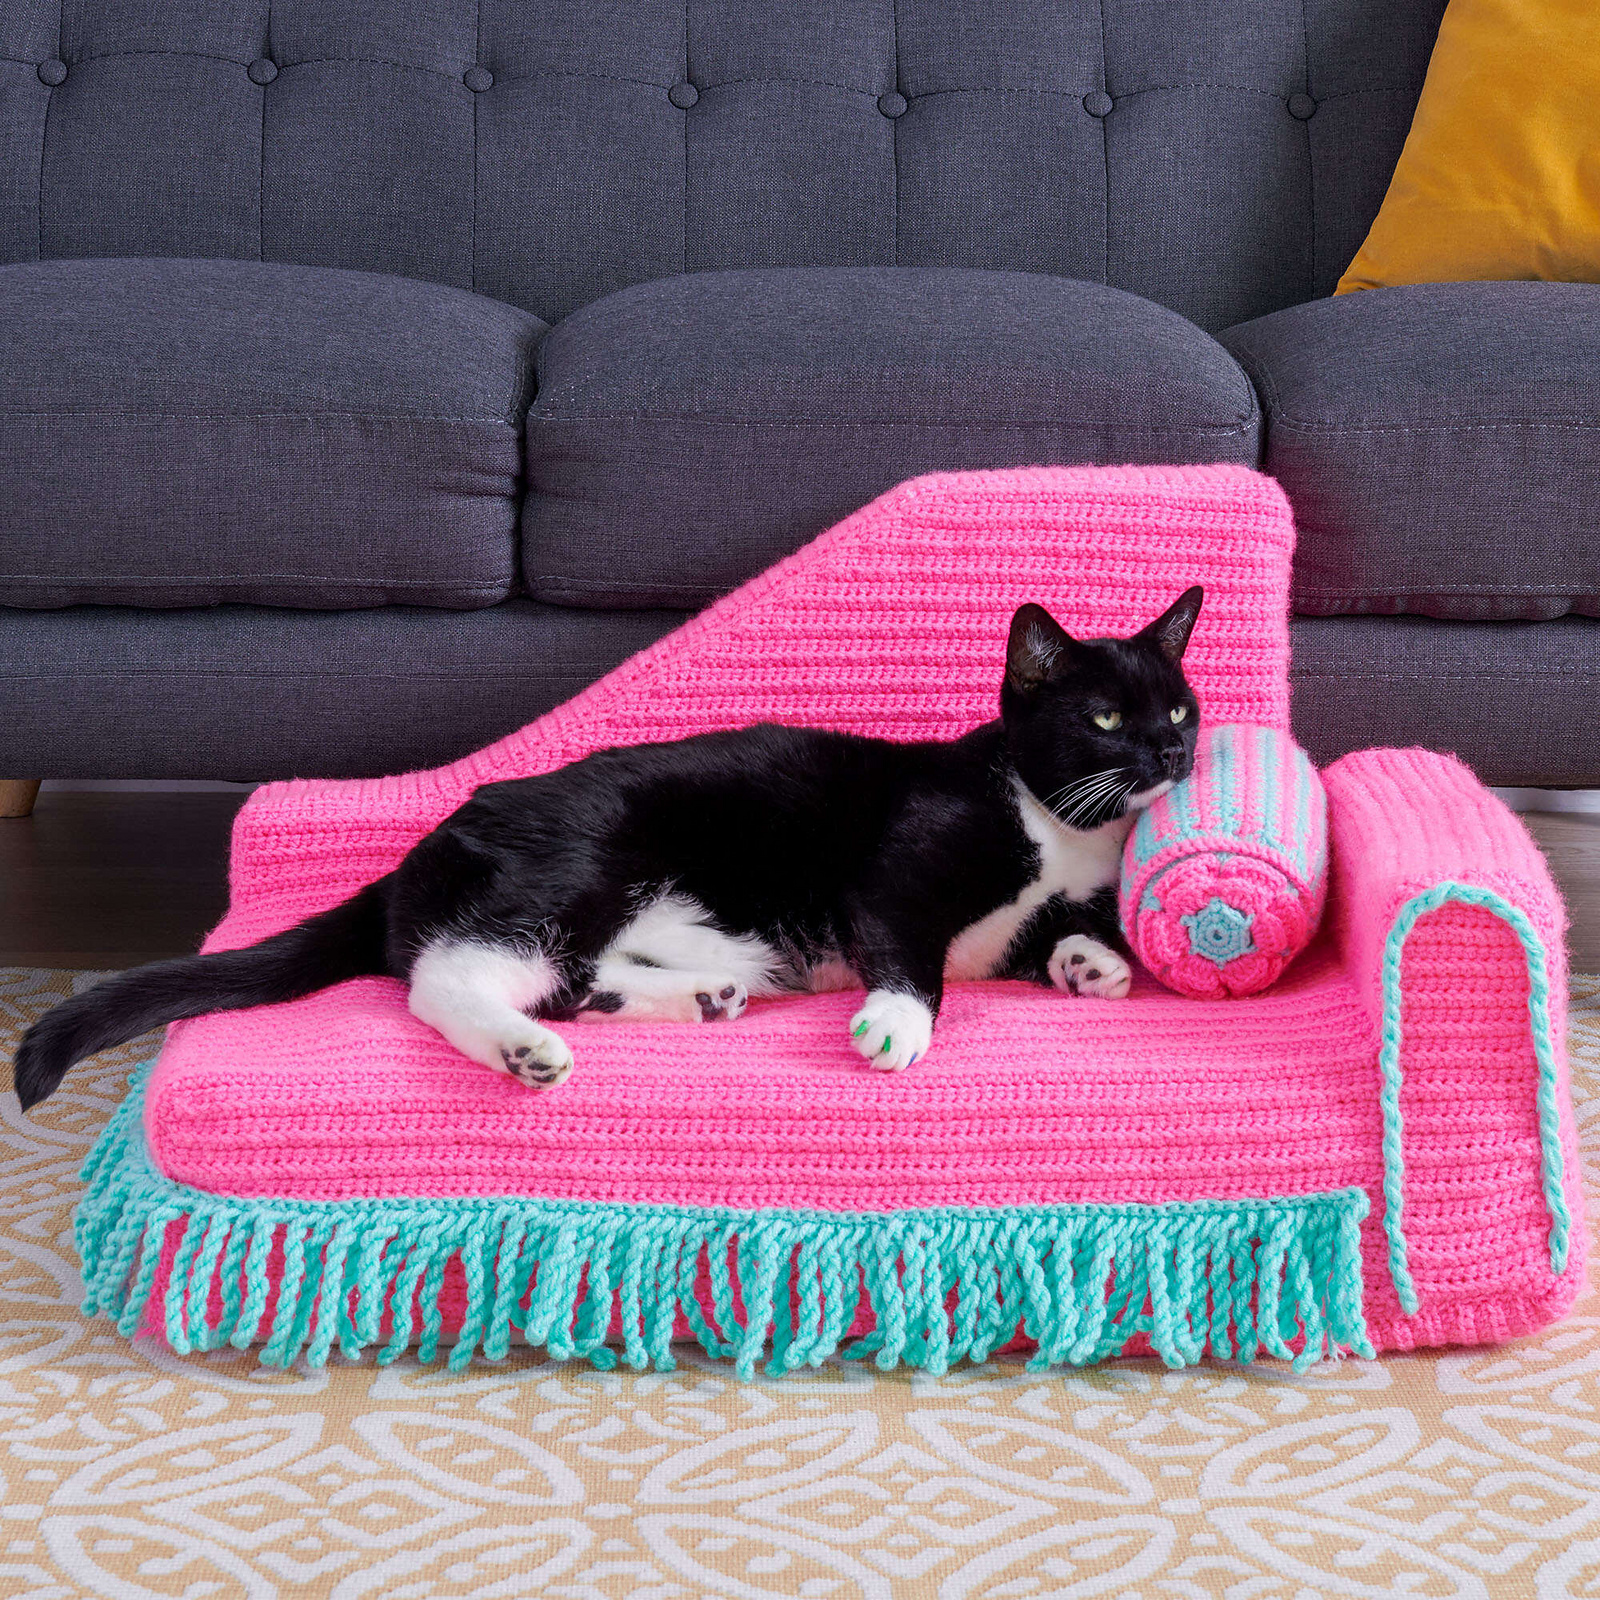 Red Heart's Latest Take On The Popular Kitty-Cat Couch ... a 'Chaise-Style Lounge'